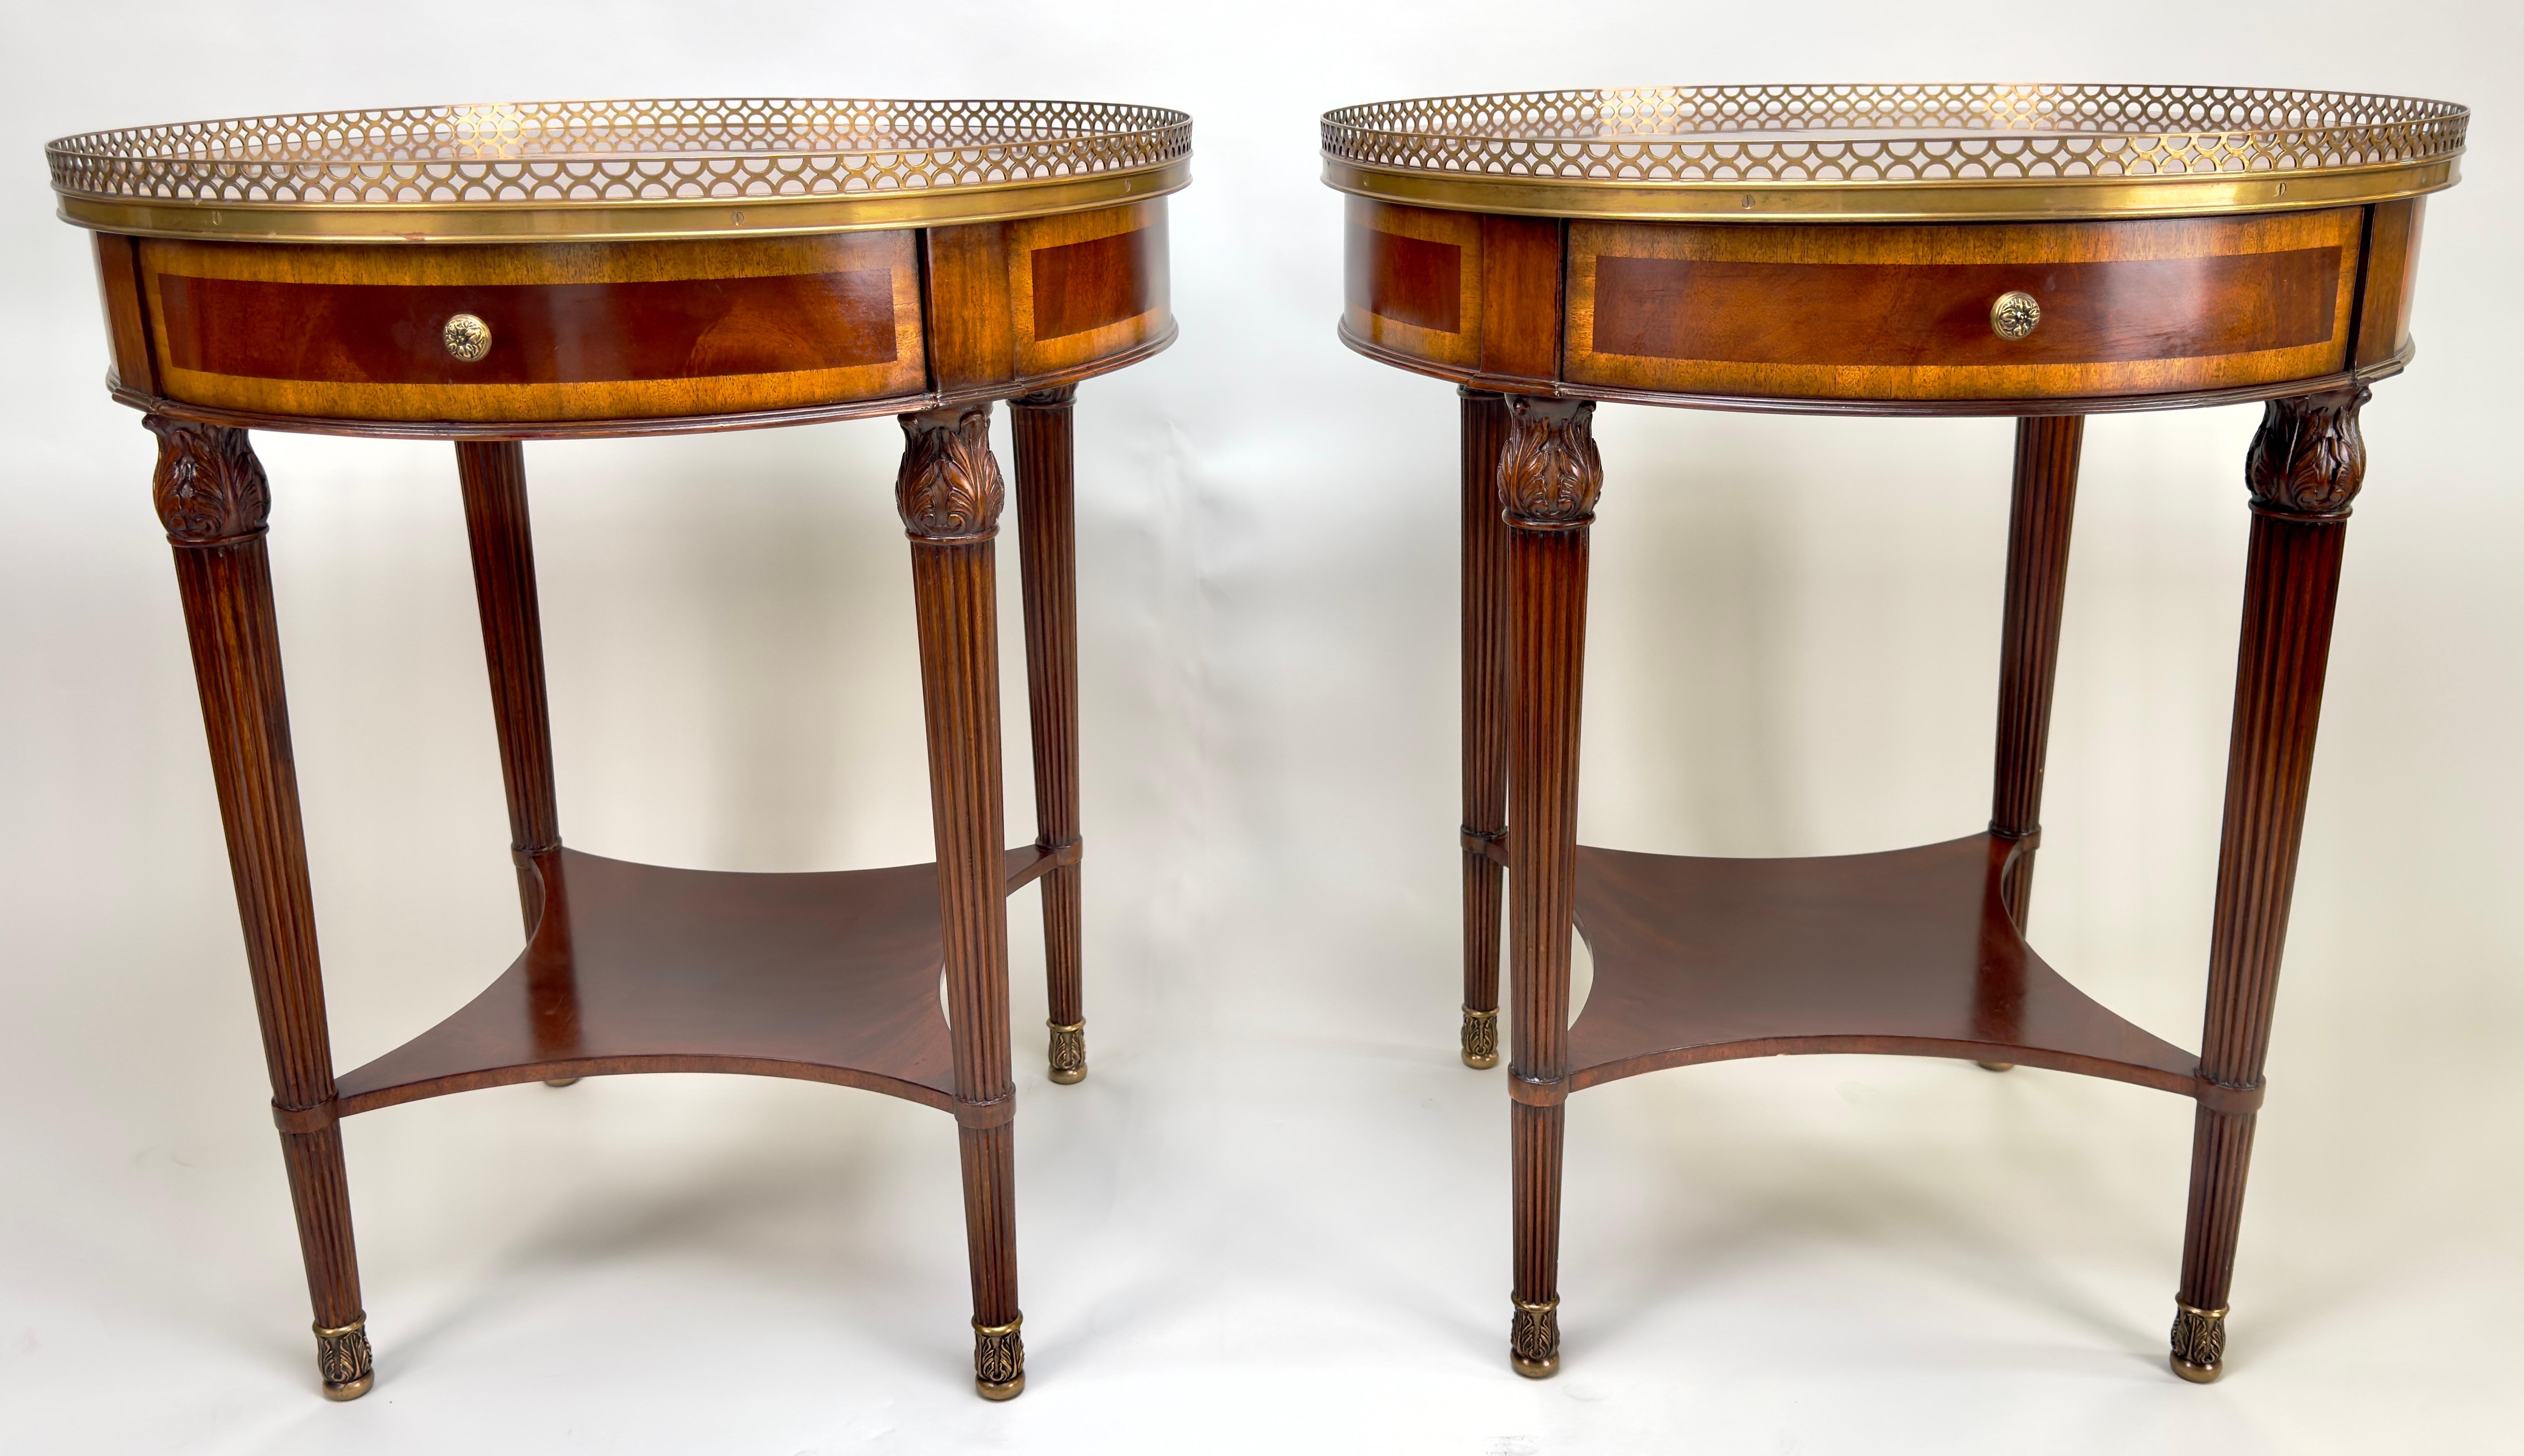 A pair of Louis XVI style bouillotte side or end tables, each a masterpiece crafted from the finest solid mahogany and adorned with delicate mahogany veneer.  At first glance, the eye is drawn to the exquisite belt drawer and its bronze floral knob.